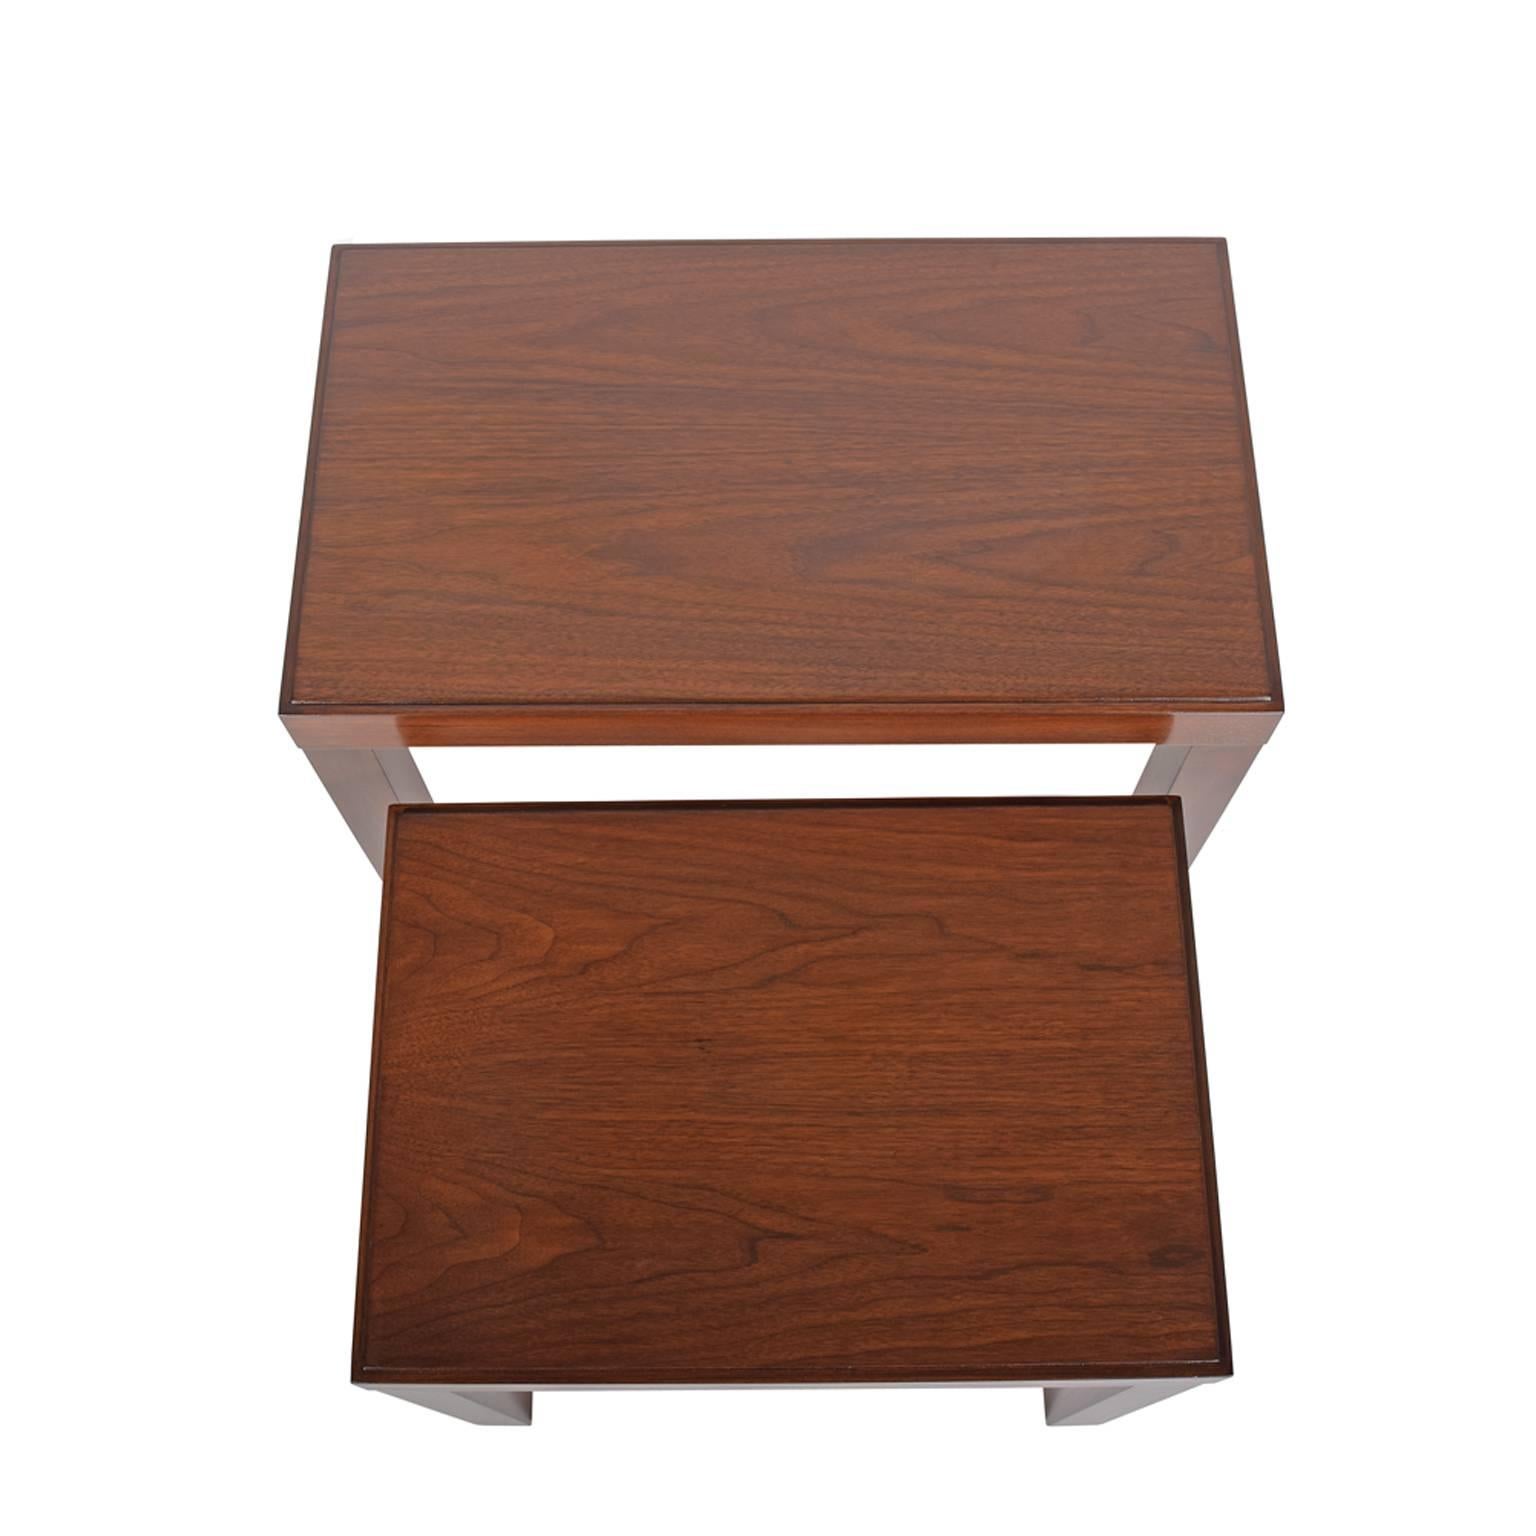 Mid-20th Century Nesting Tables by George Nelson for Herman Miller #635/6